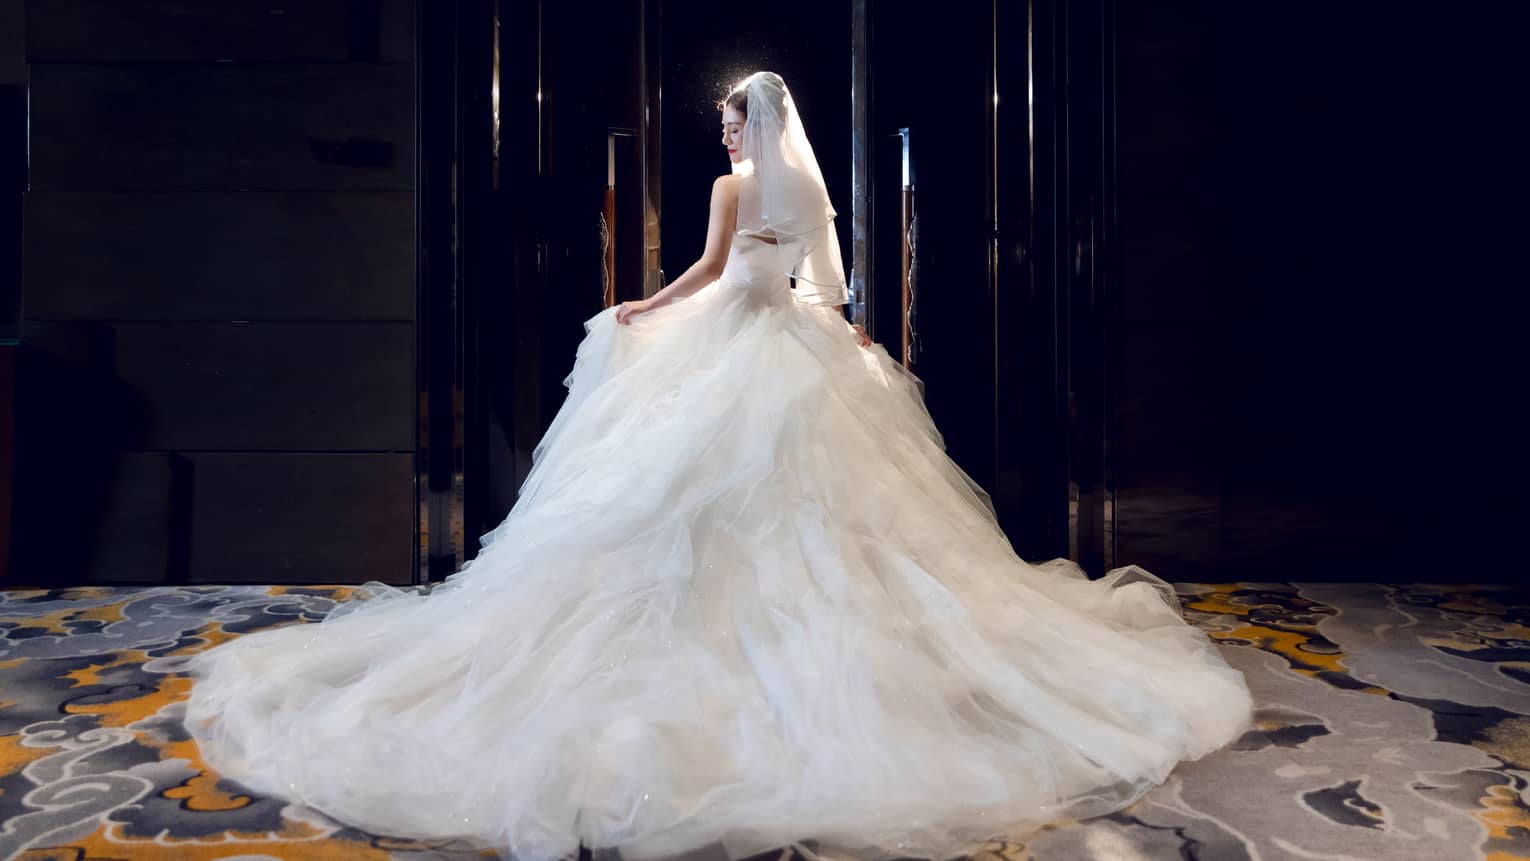 Bride in ball gown-style dress stands in the Grand Ballroom